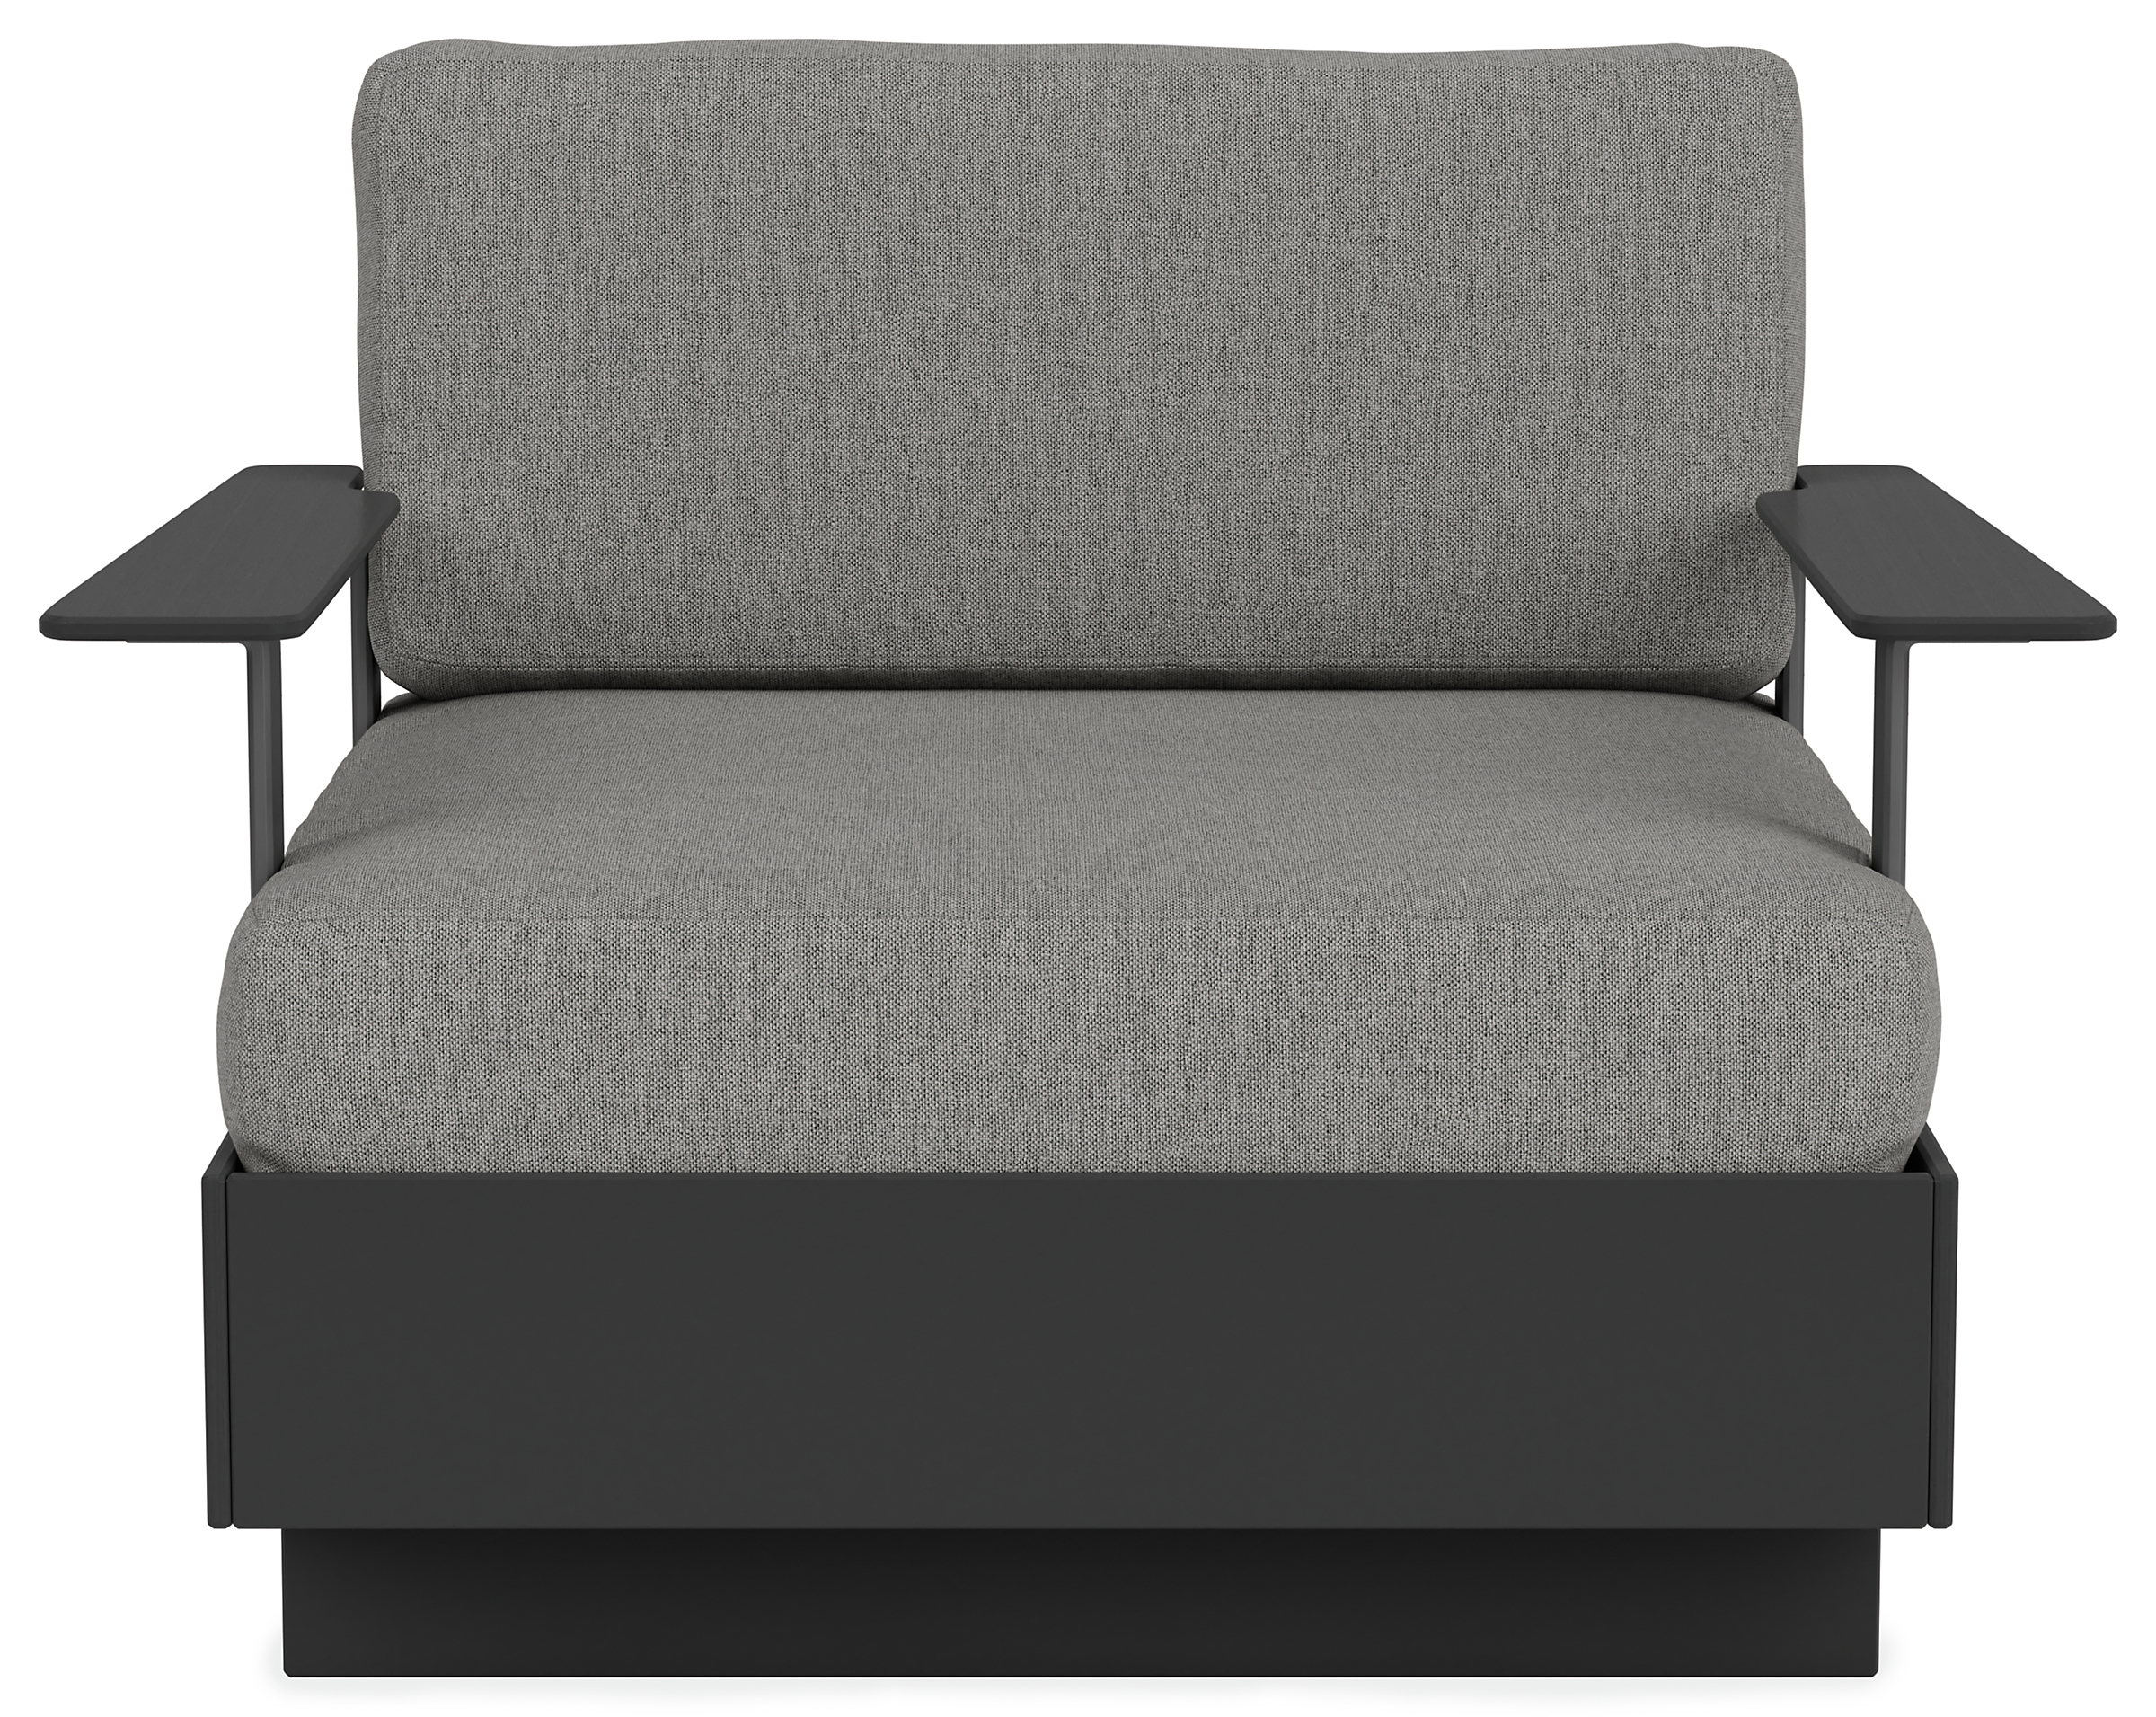 Front view of Omni Lounge Chair in Mist Fabric.